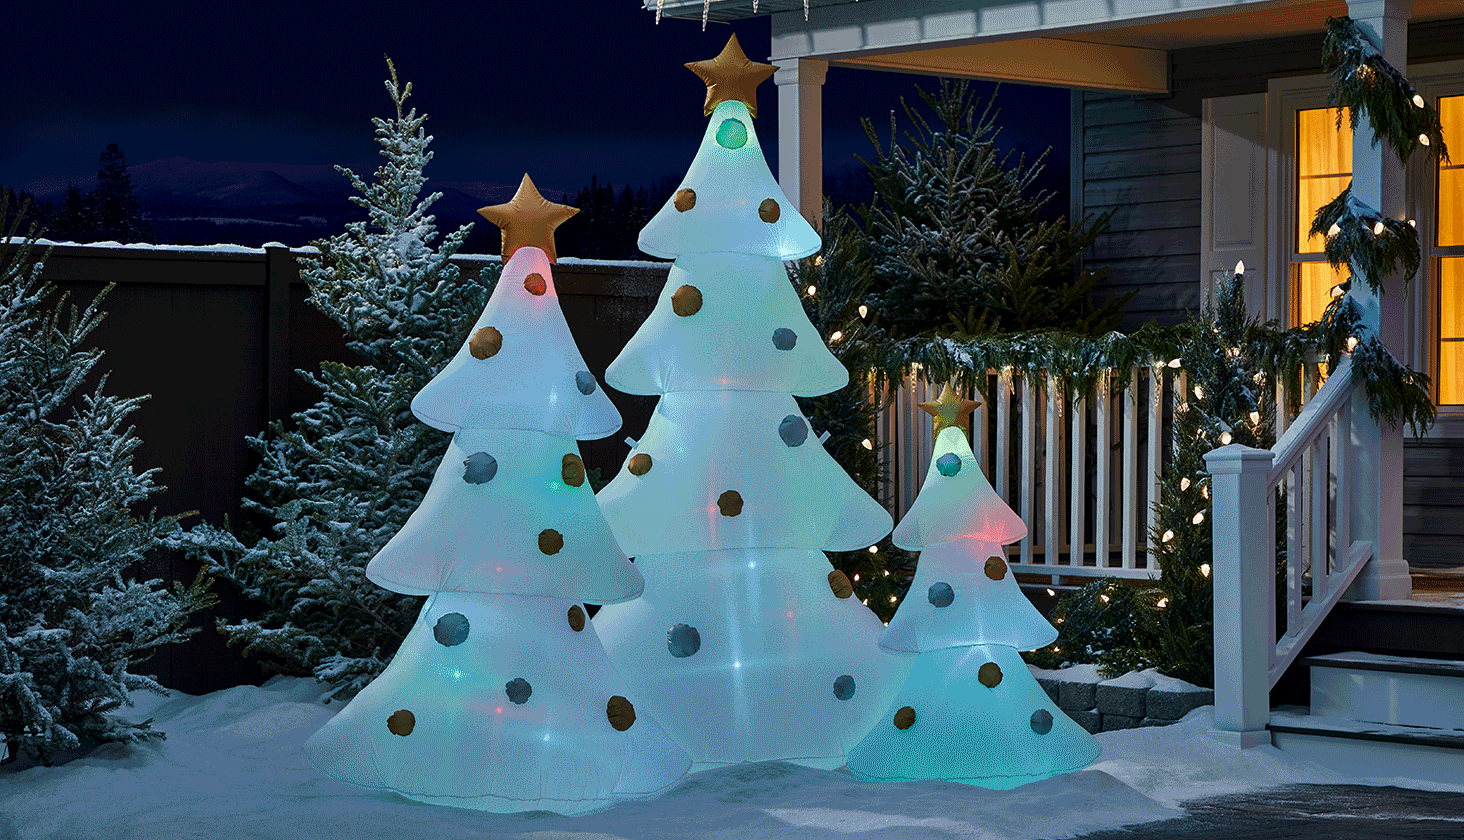 NOMA Advanced Smart 2.0 Christmas trees, 4-ft, 6-ft, 8-ft, on a snowy front lawn.